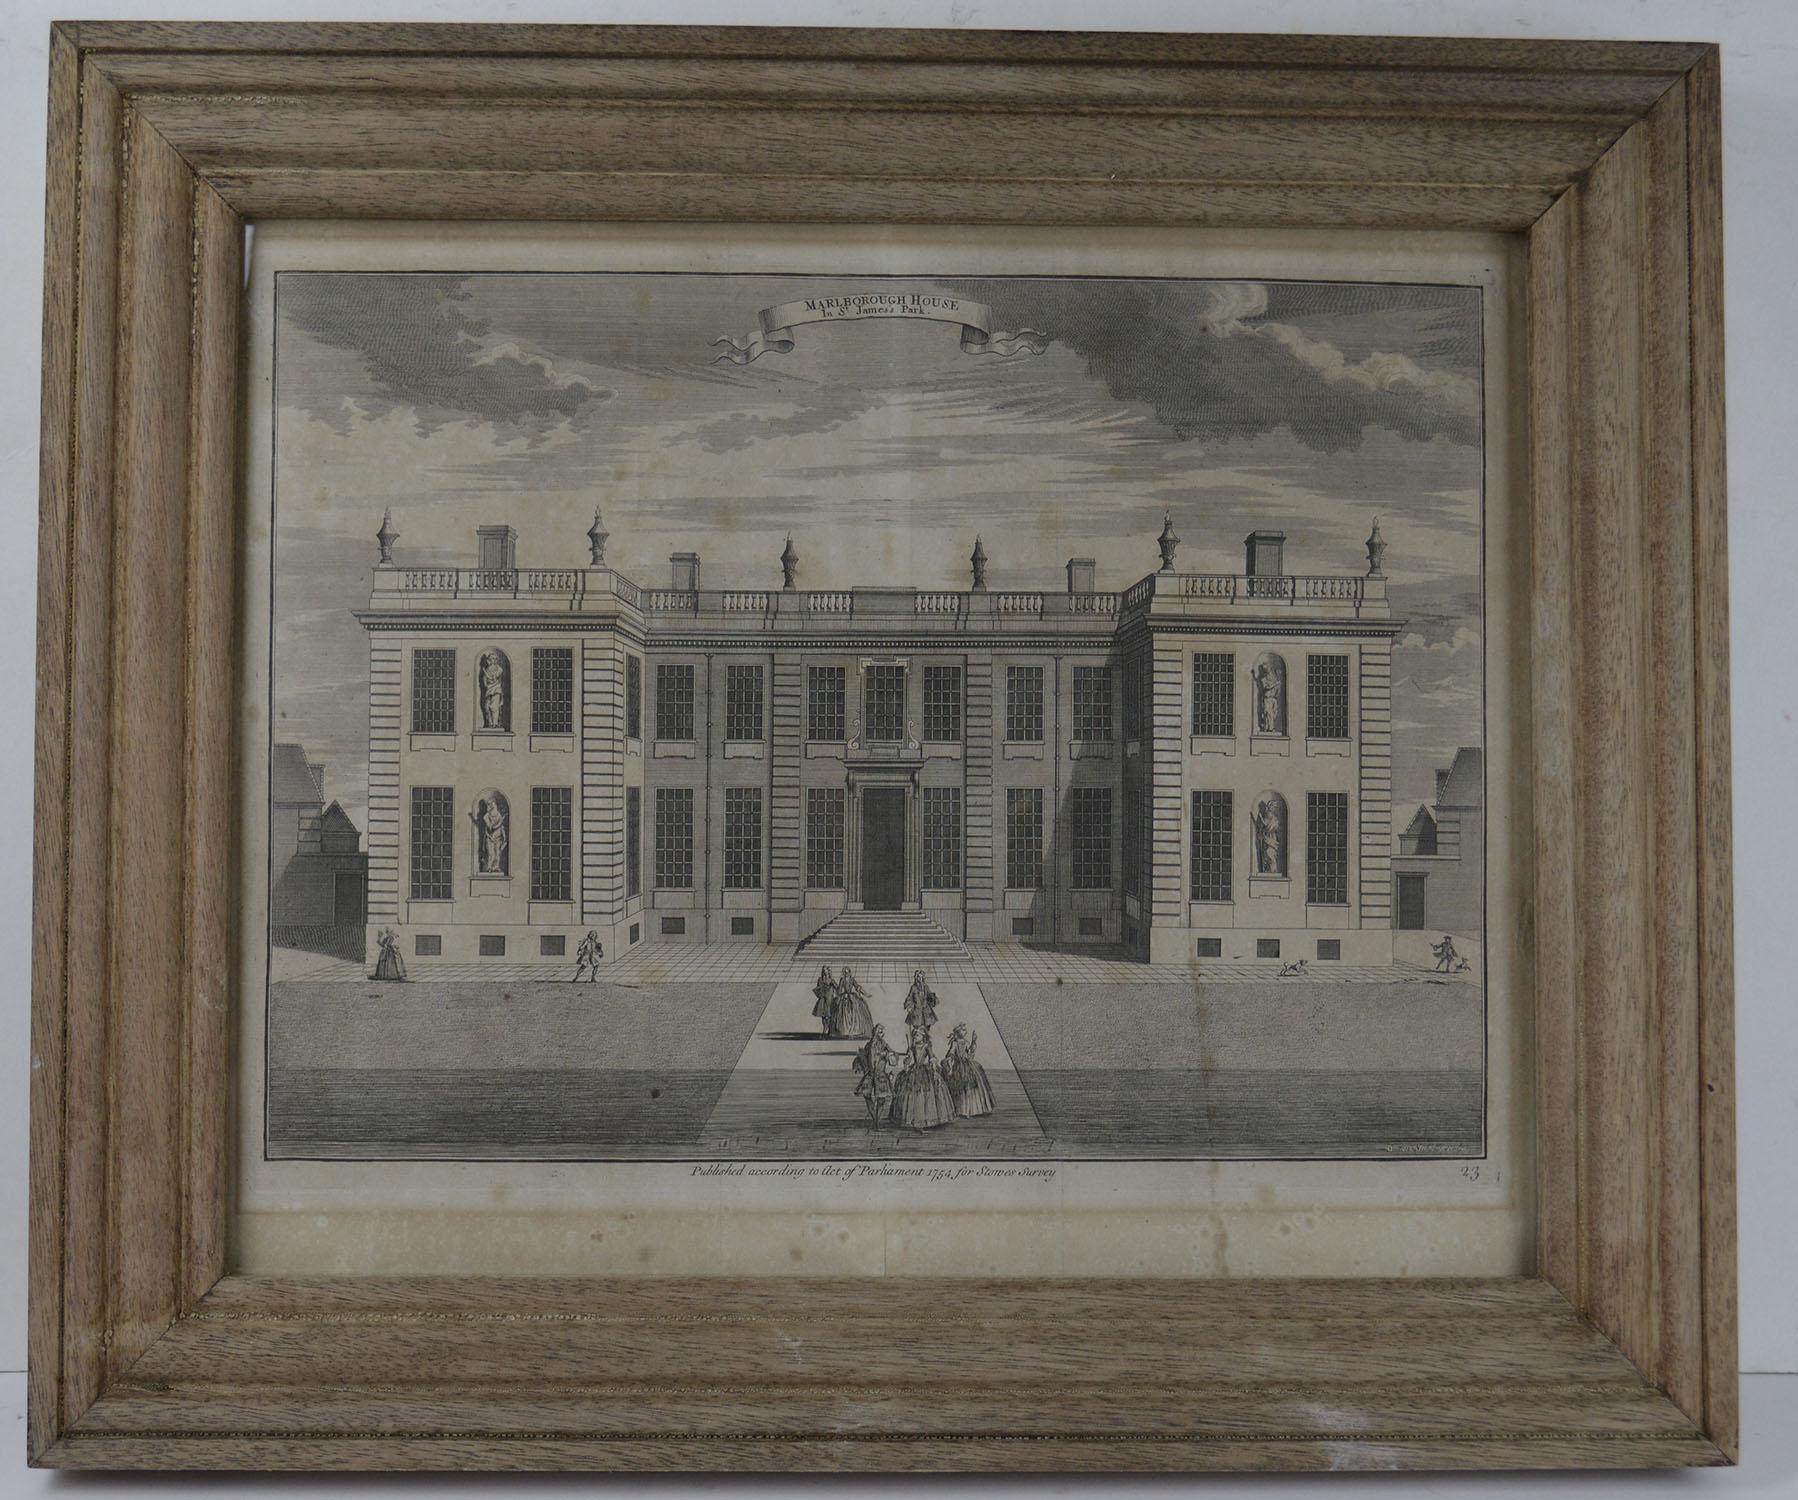 Bleached Set of 4 Antique Architectural Prints, London, Dated 1754